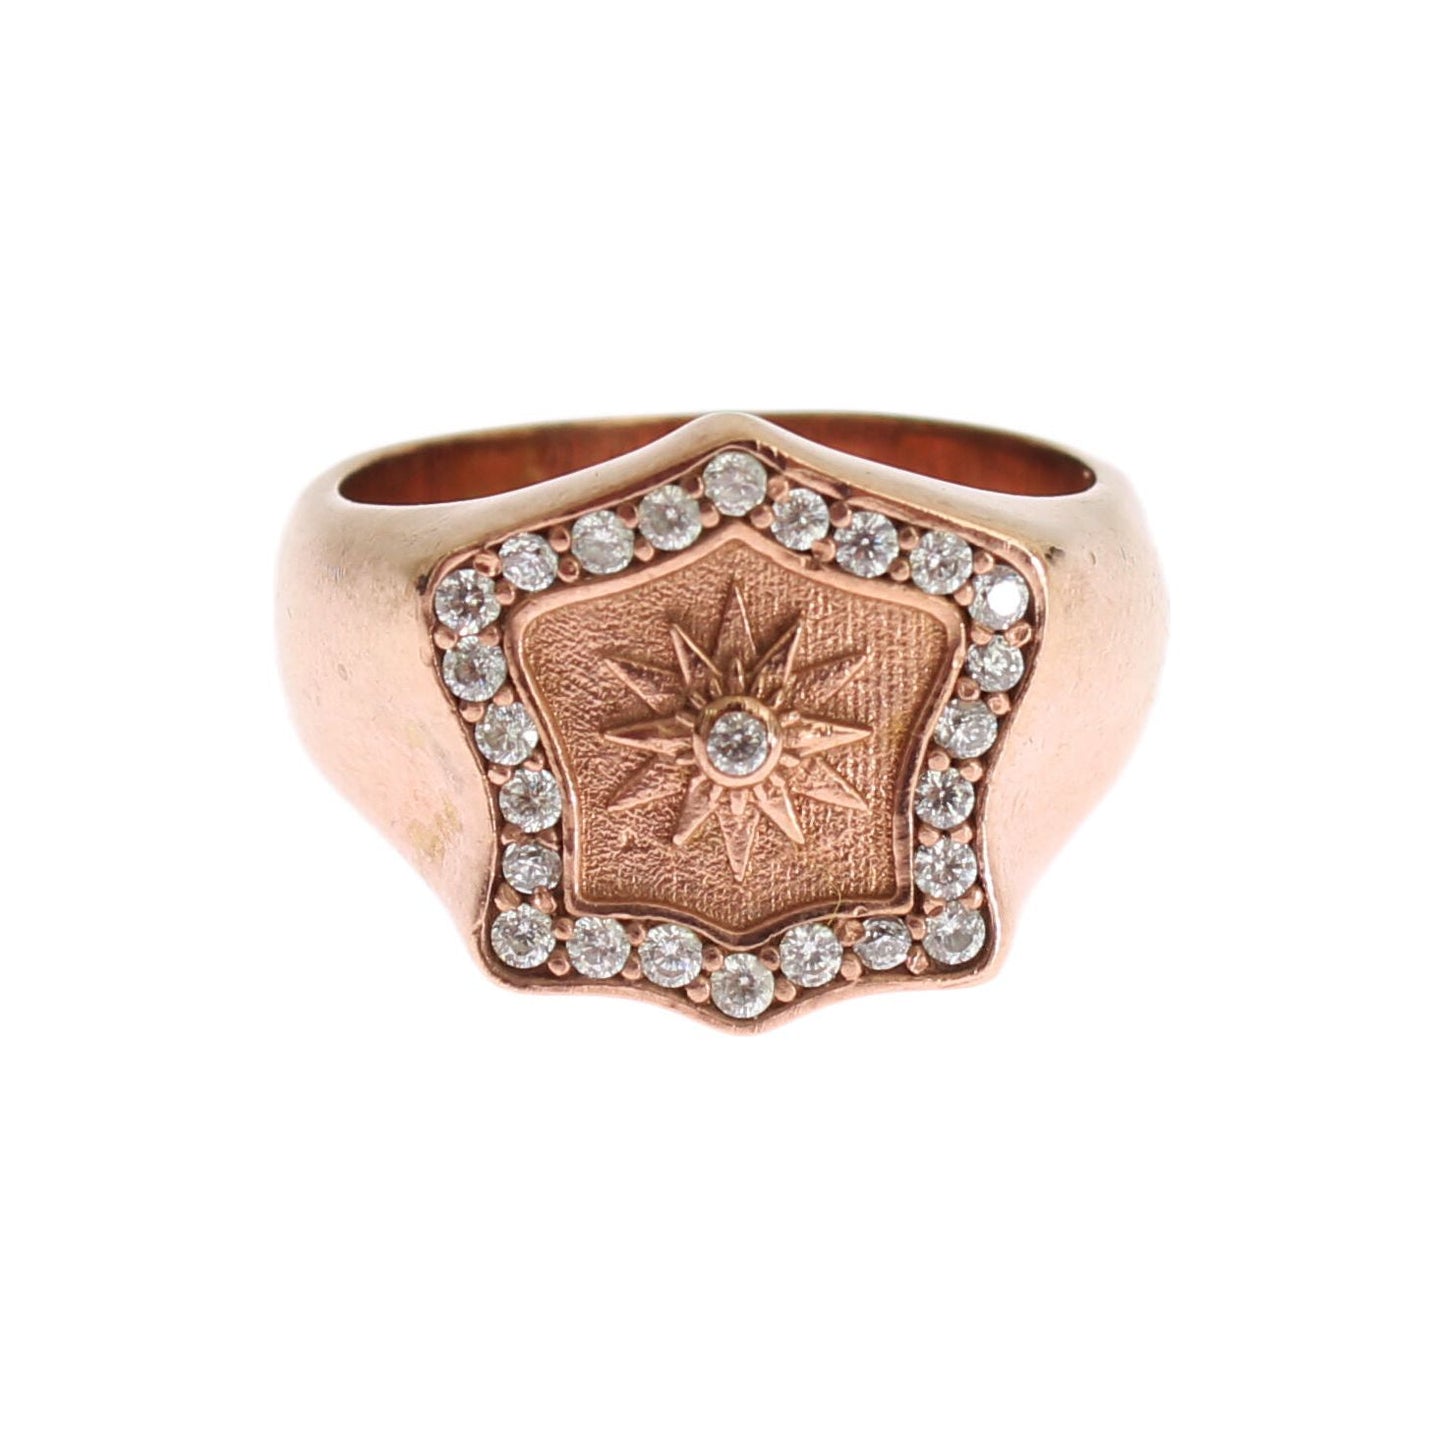 Chic Pink Gold Plated Sterling Silver Ring Nialaya